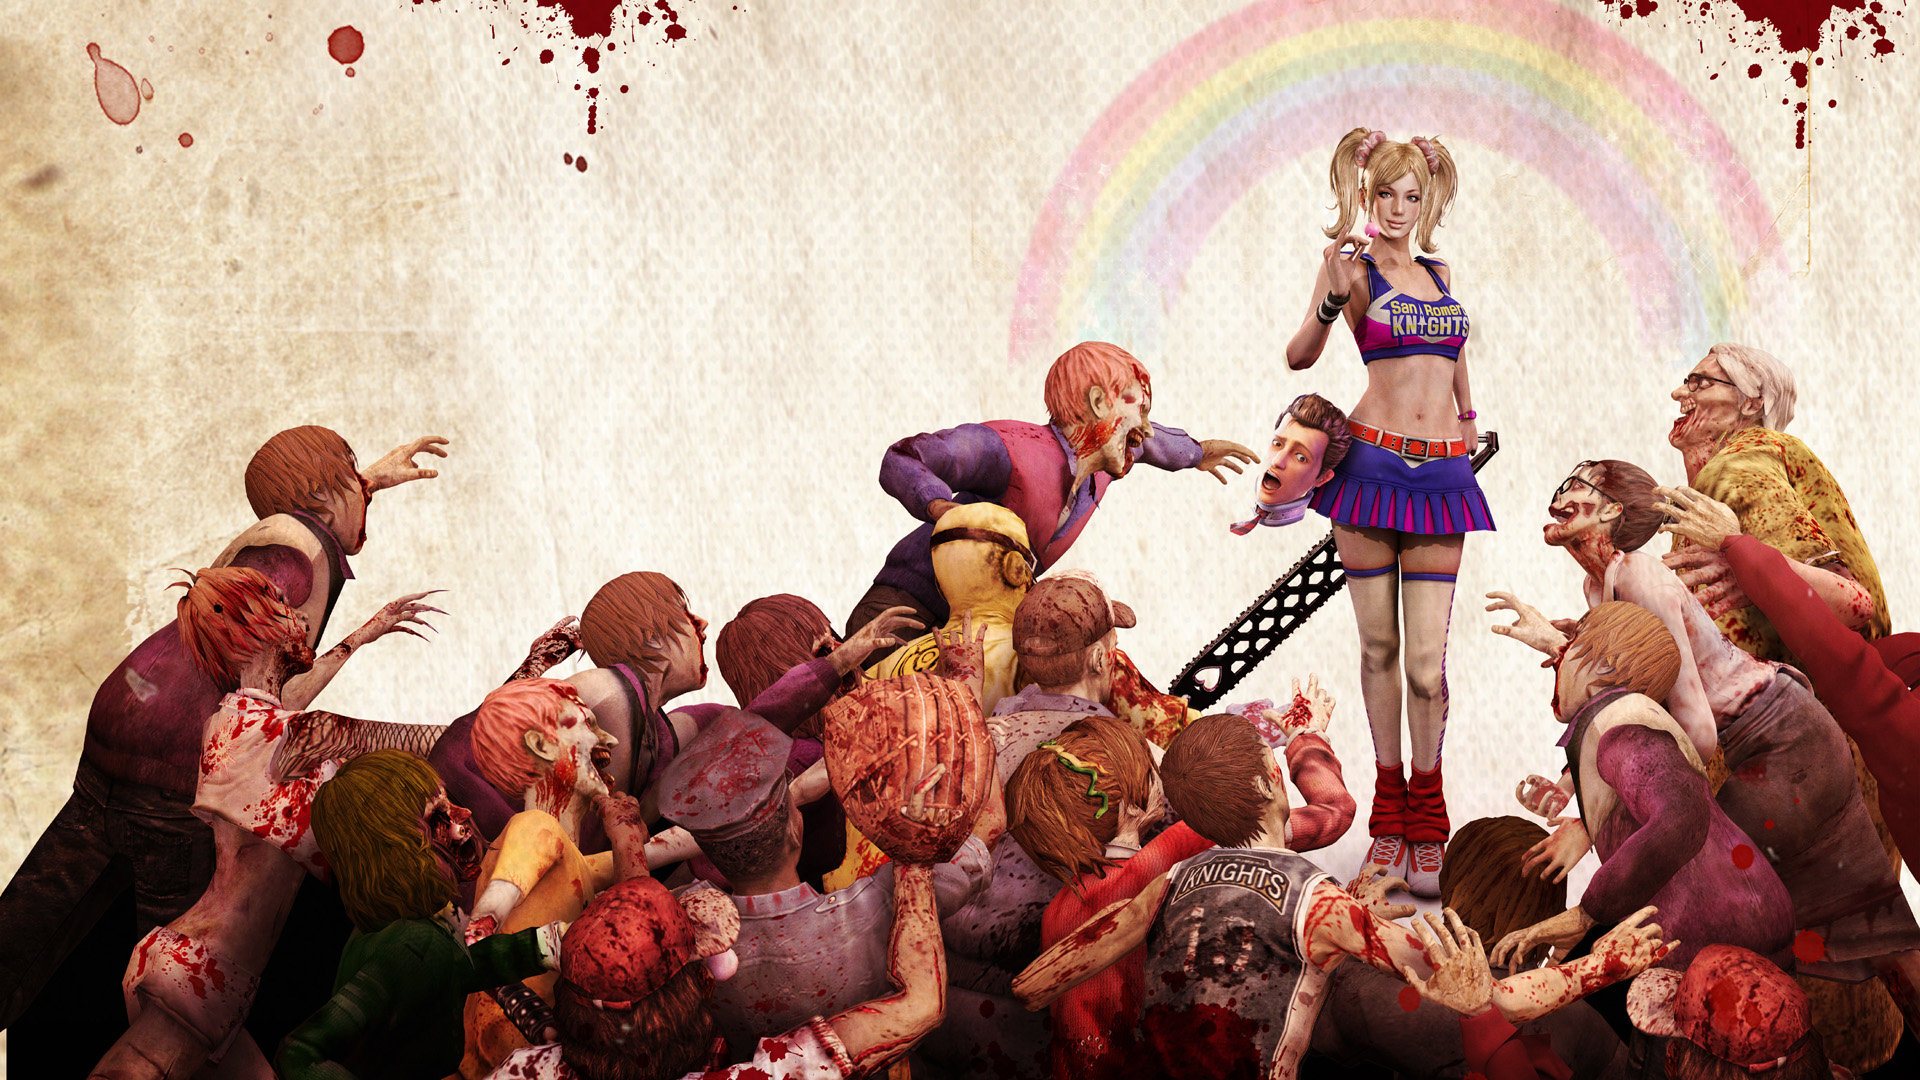 Lollipop Chainsaw Wallpapers Hd For Desktop Backgrounds Images, Photos, Reviews